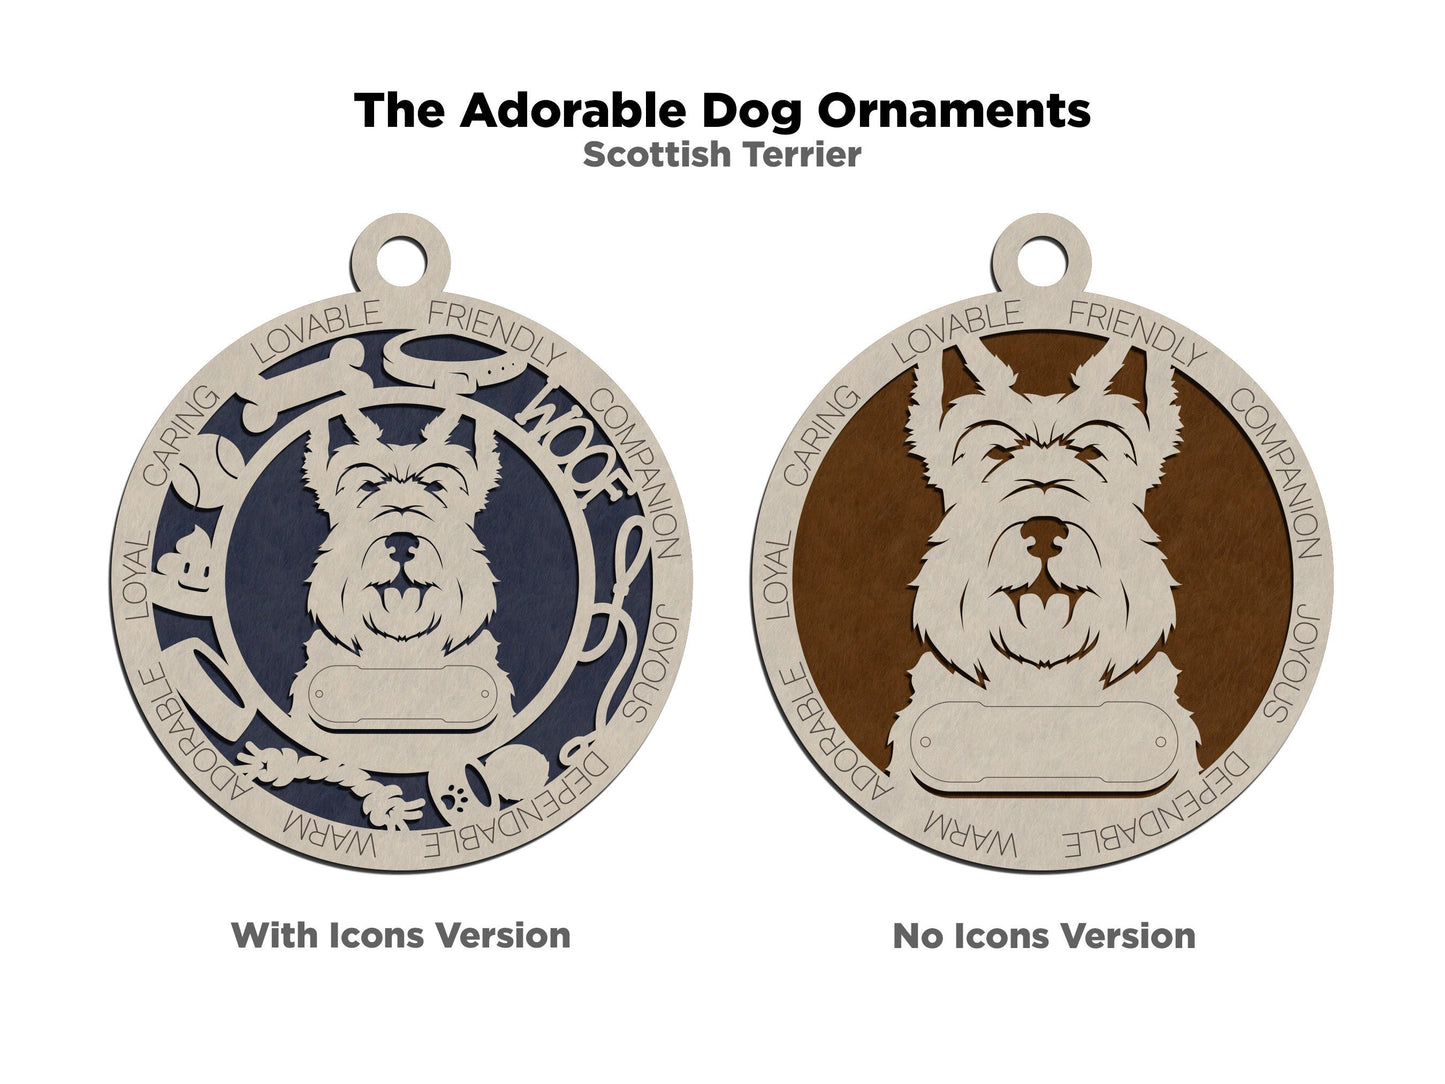 Scottish Terrier - Adorable Dog Ornaments - 2 Ornaments included - SVG, PDF, AI File Download - Sized for Glowforge